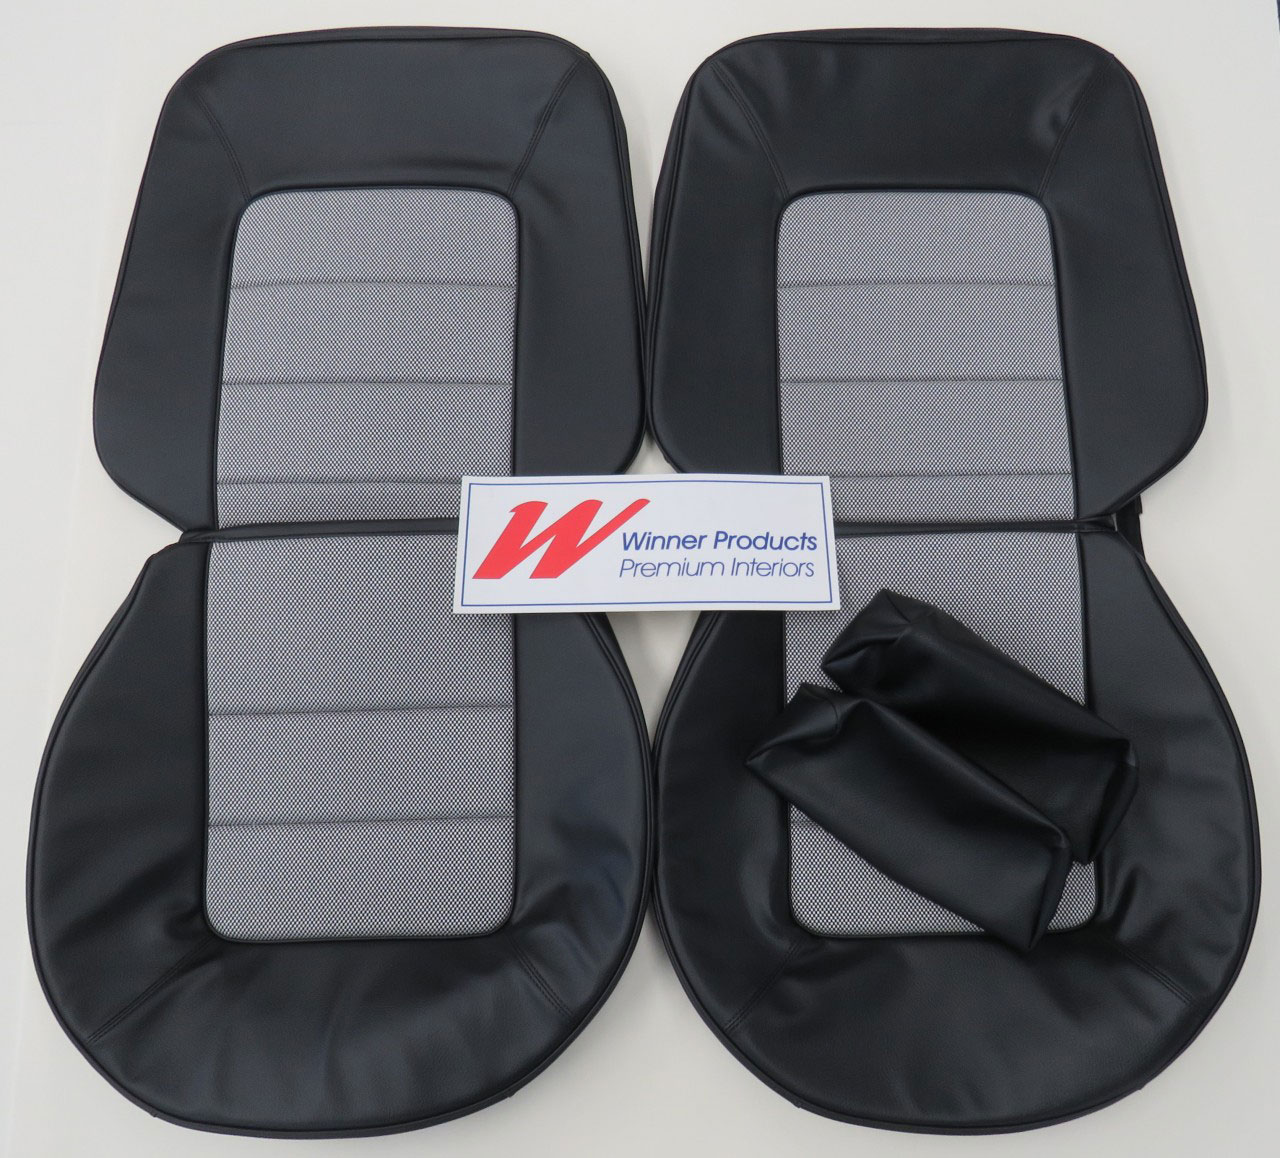 Holden SS HQ SS Sedan 10D Black Seat Covers (Image 1 of 4)